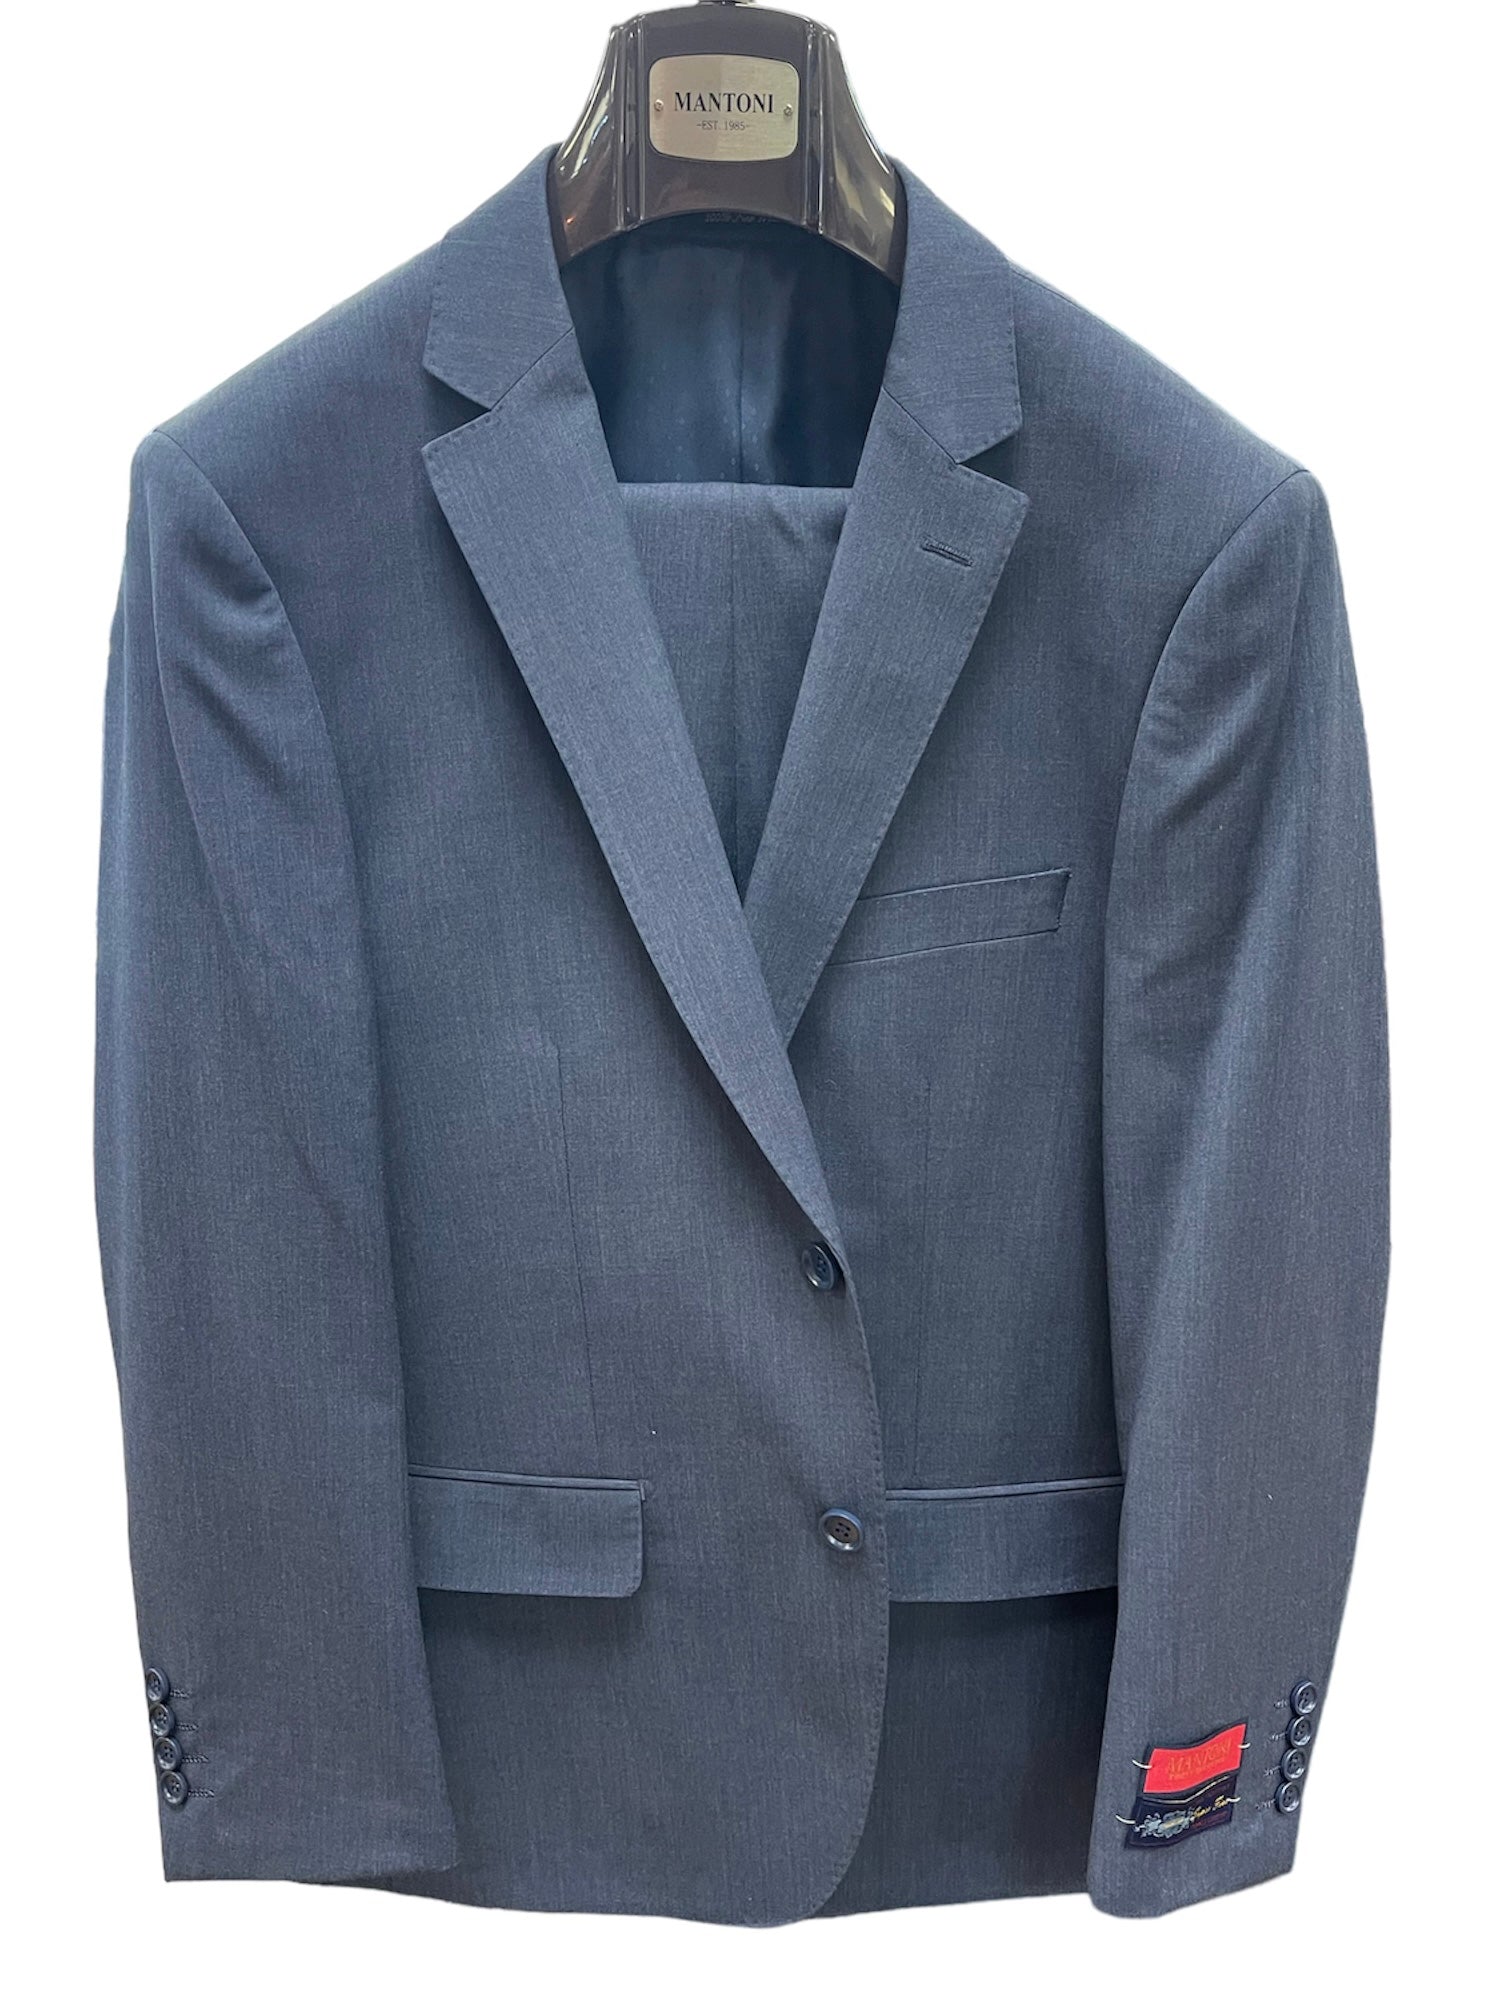 A SHARP LOOKING SUIT - BLUE